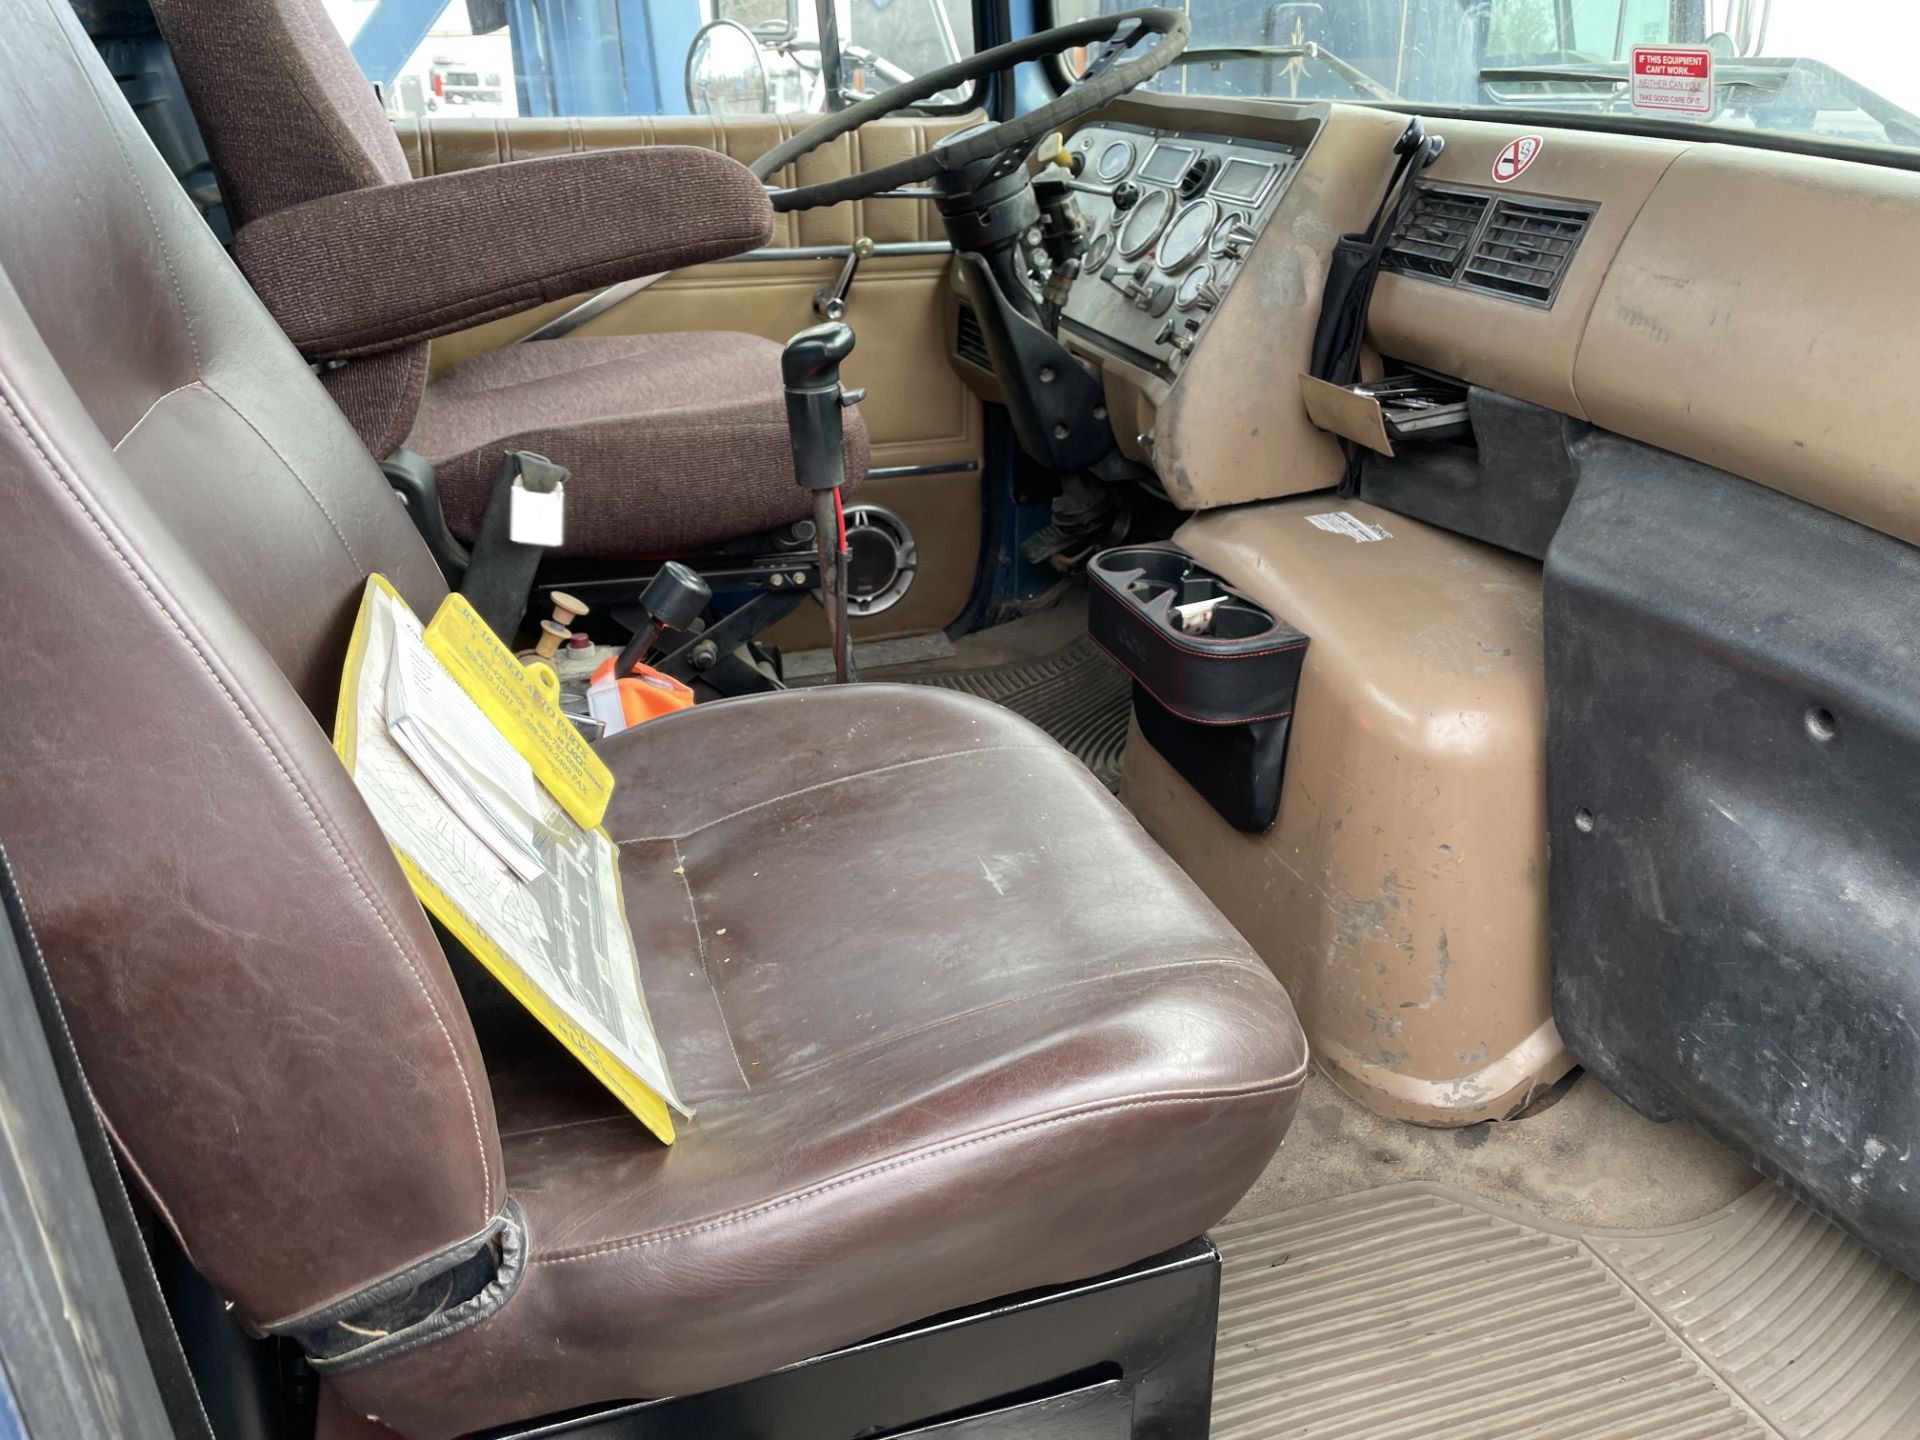 1995 Ford Aero MAX L-9000 10 Wheel Day Cab. Eaton Fuller Trans., Detroit Diesel Series 60 Engine, - Image 10 of 11